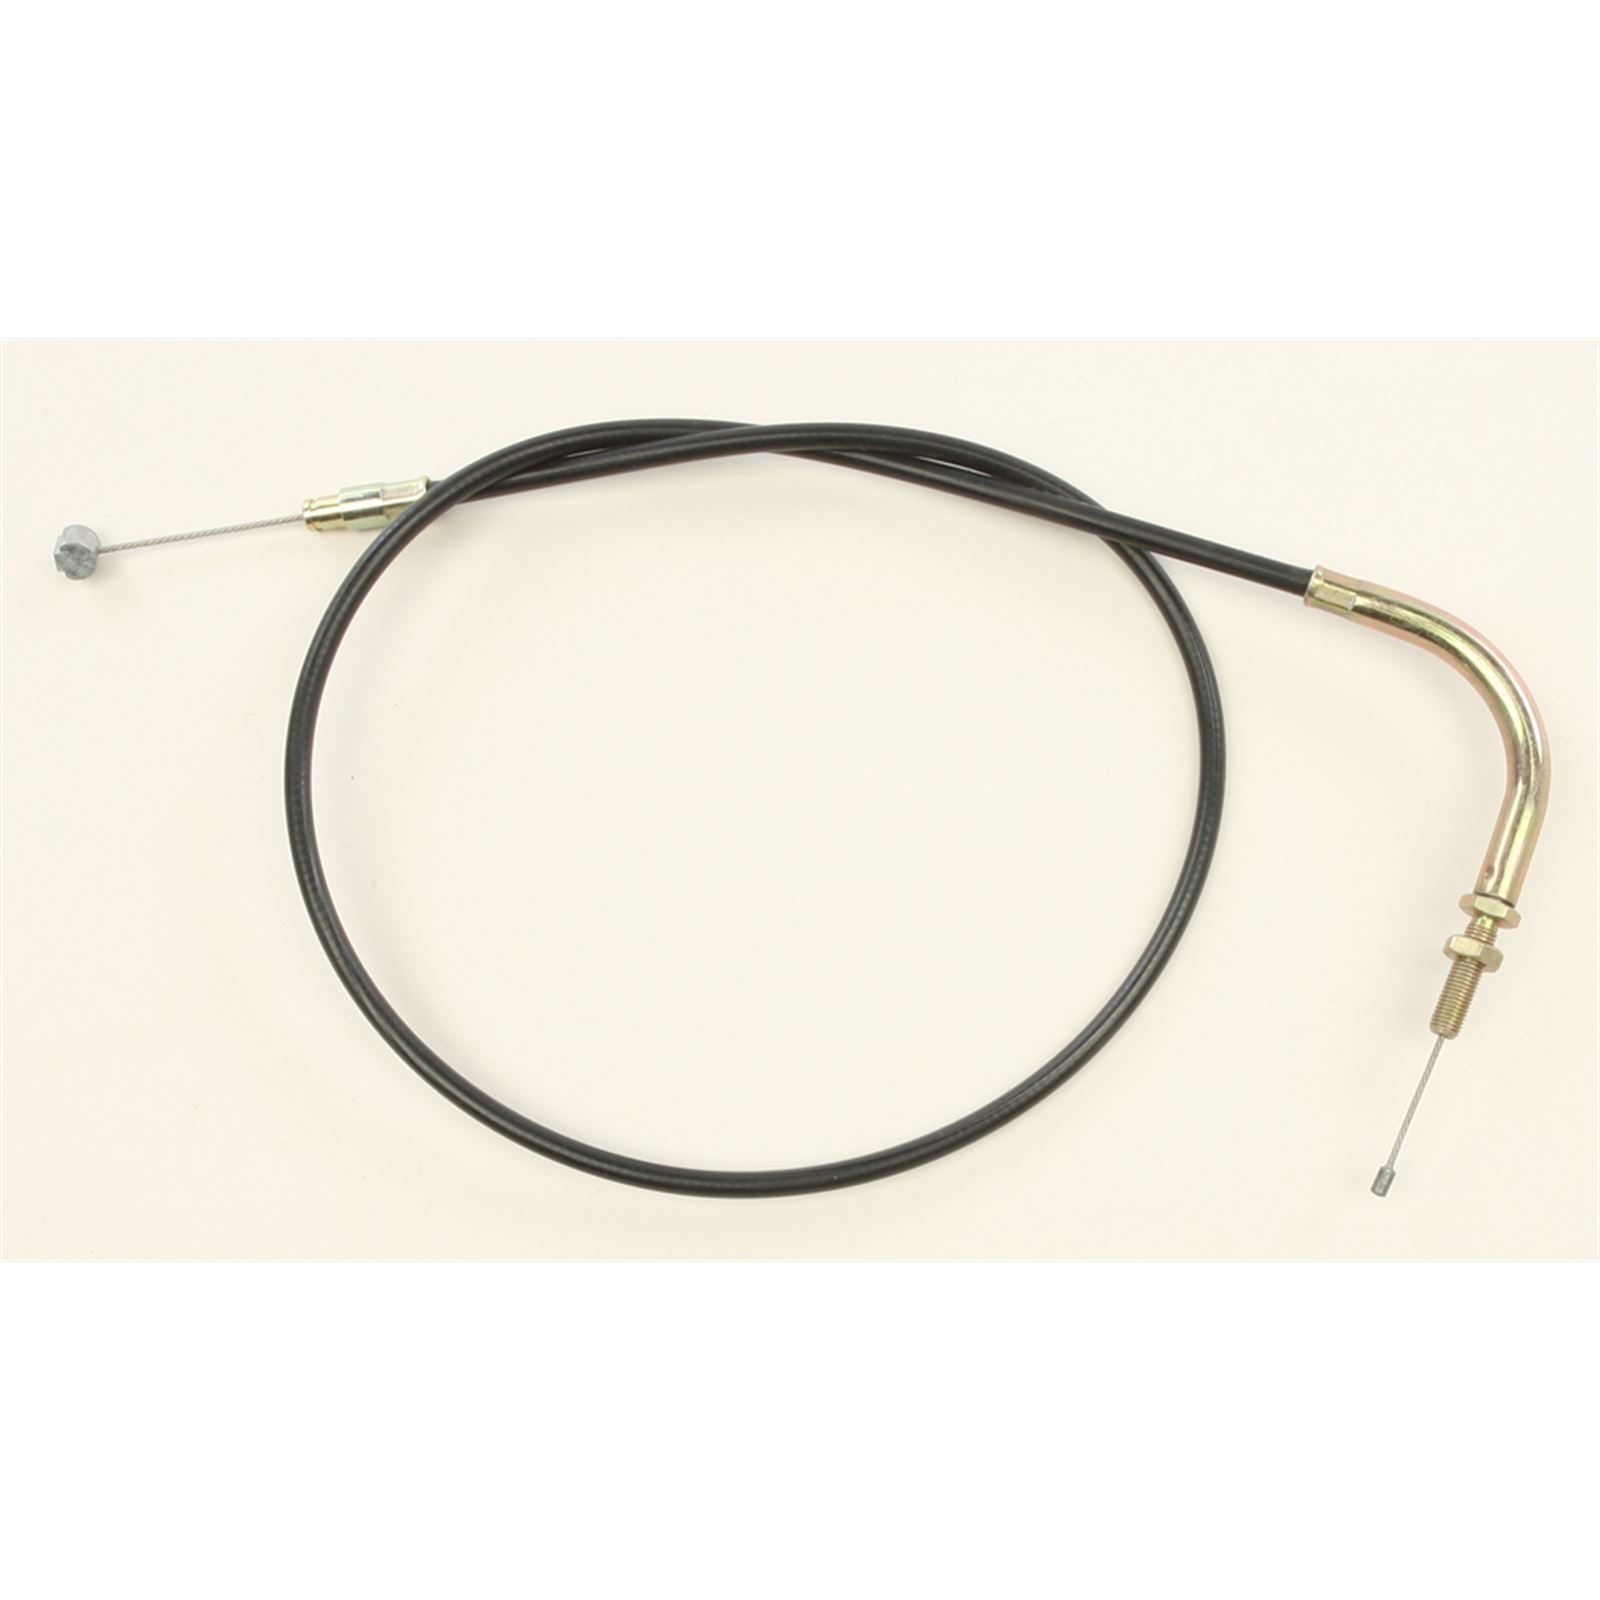 SPI Snowmobile Replacement Stock Length Throttle Cable For Ski-Doo 05-138-95